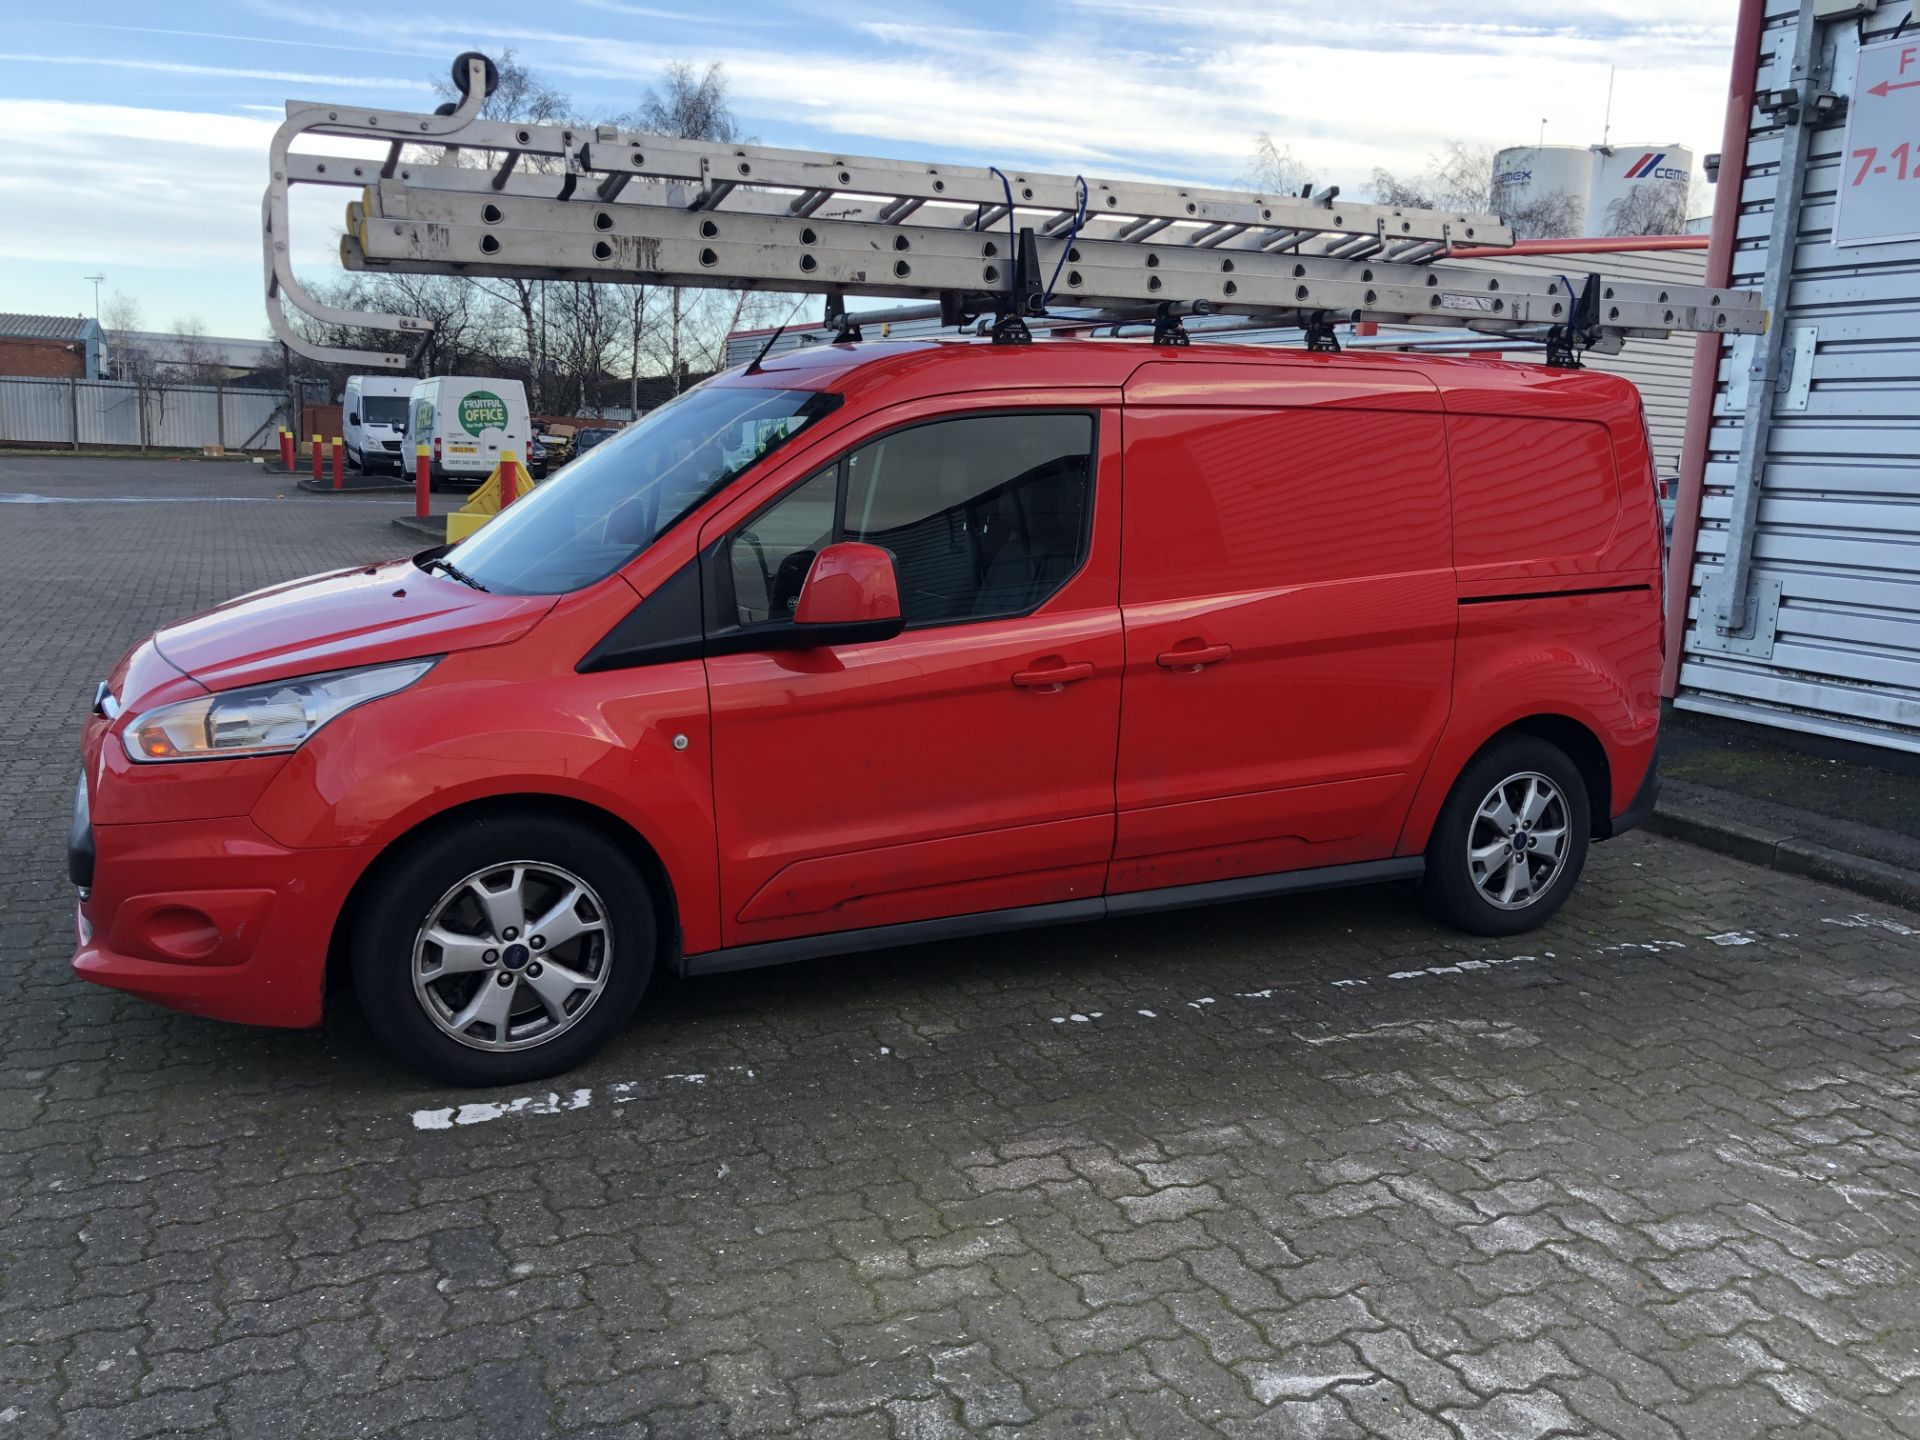 Ford Transit Connect 240 Limited, Red - Image 3 of 18